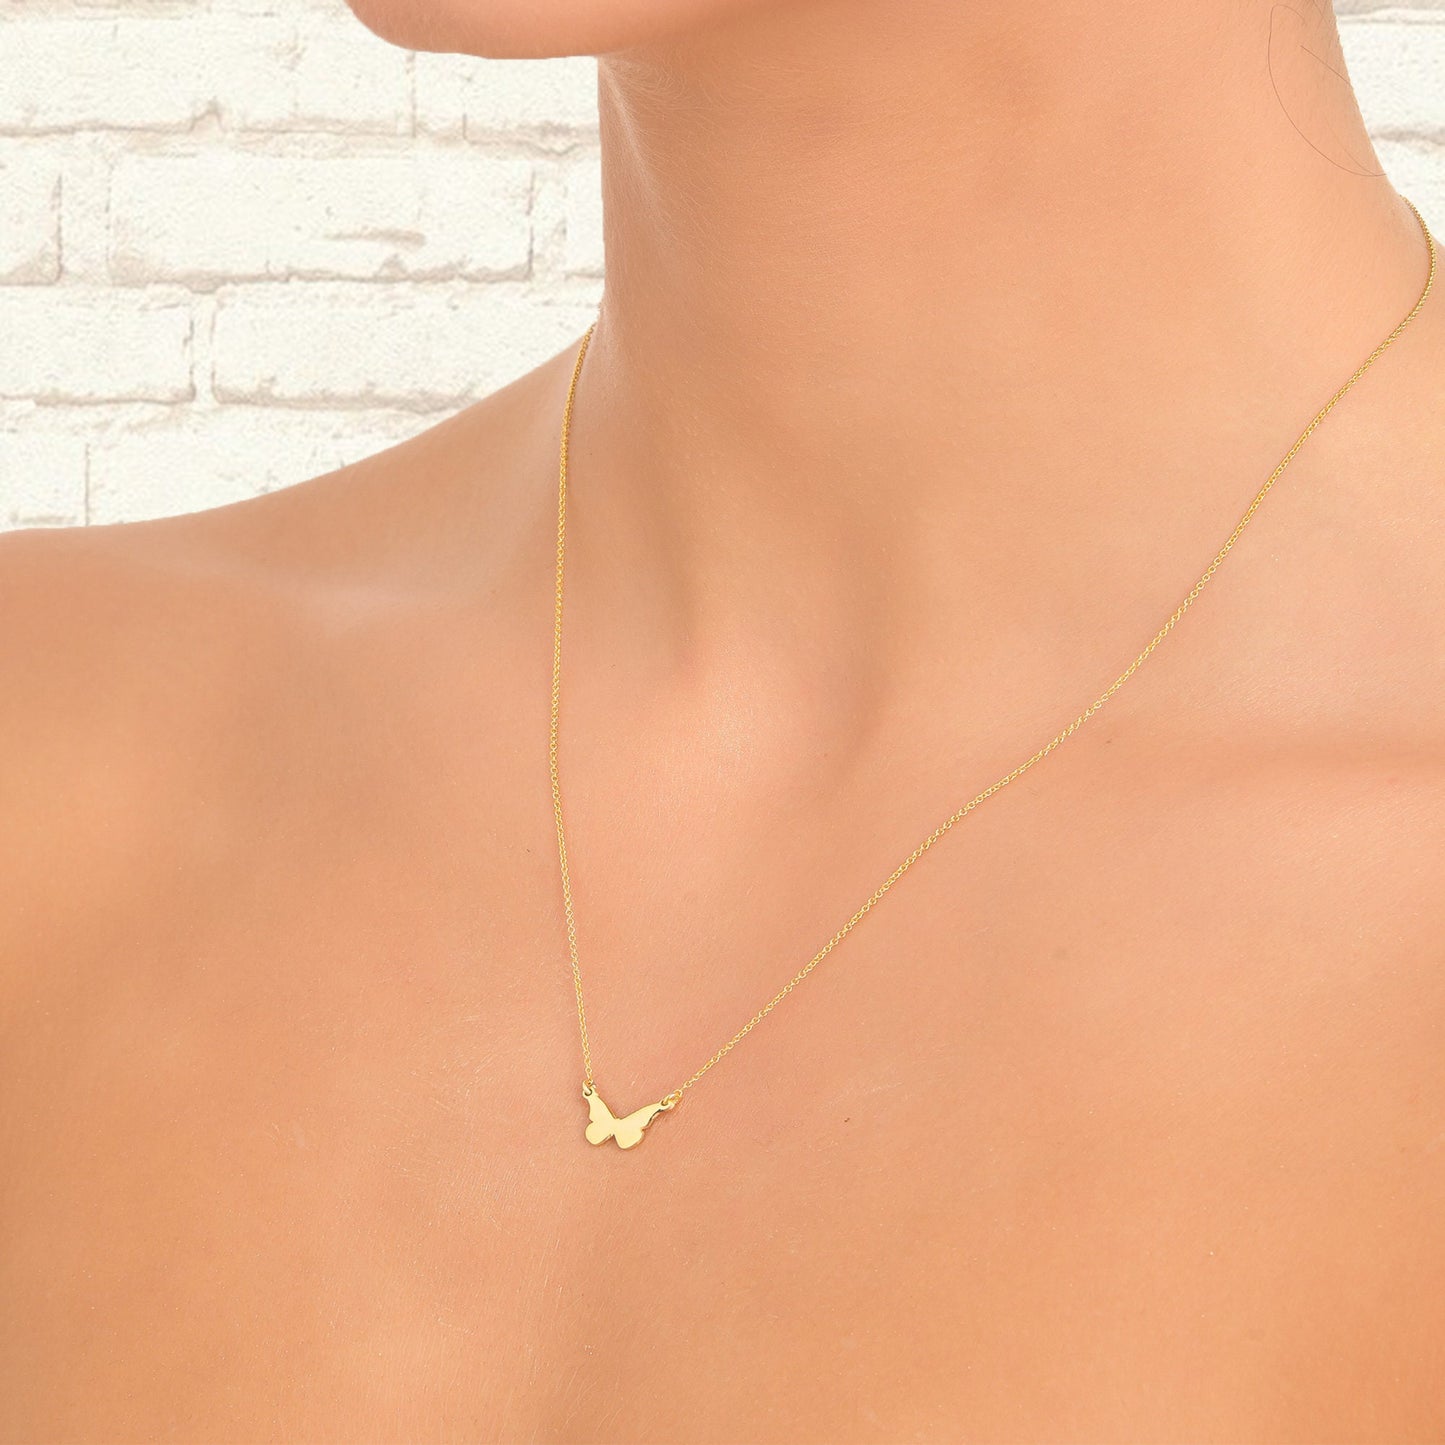 Dainty 14k Solid Gold Butterfly Necklace, Minimalist Gold Charm Pendant, Tiny Gold Butterfly Necklace, Birthday Gift  layered necklace gift